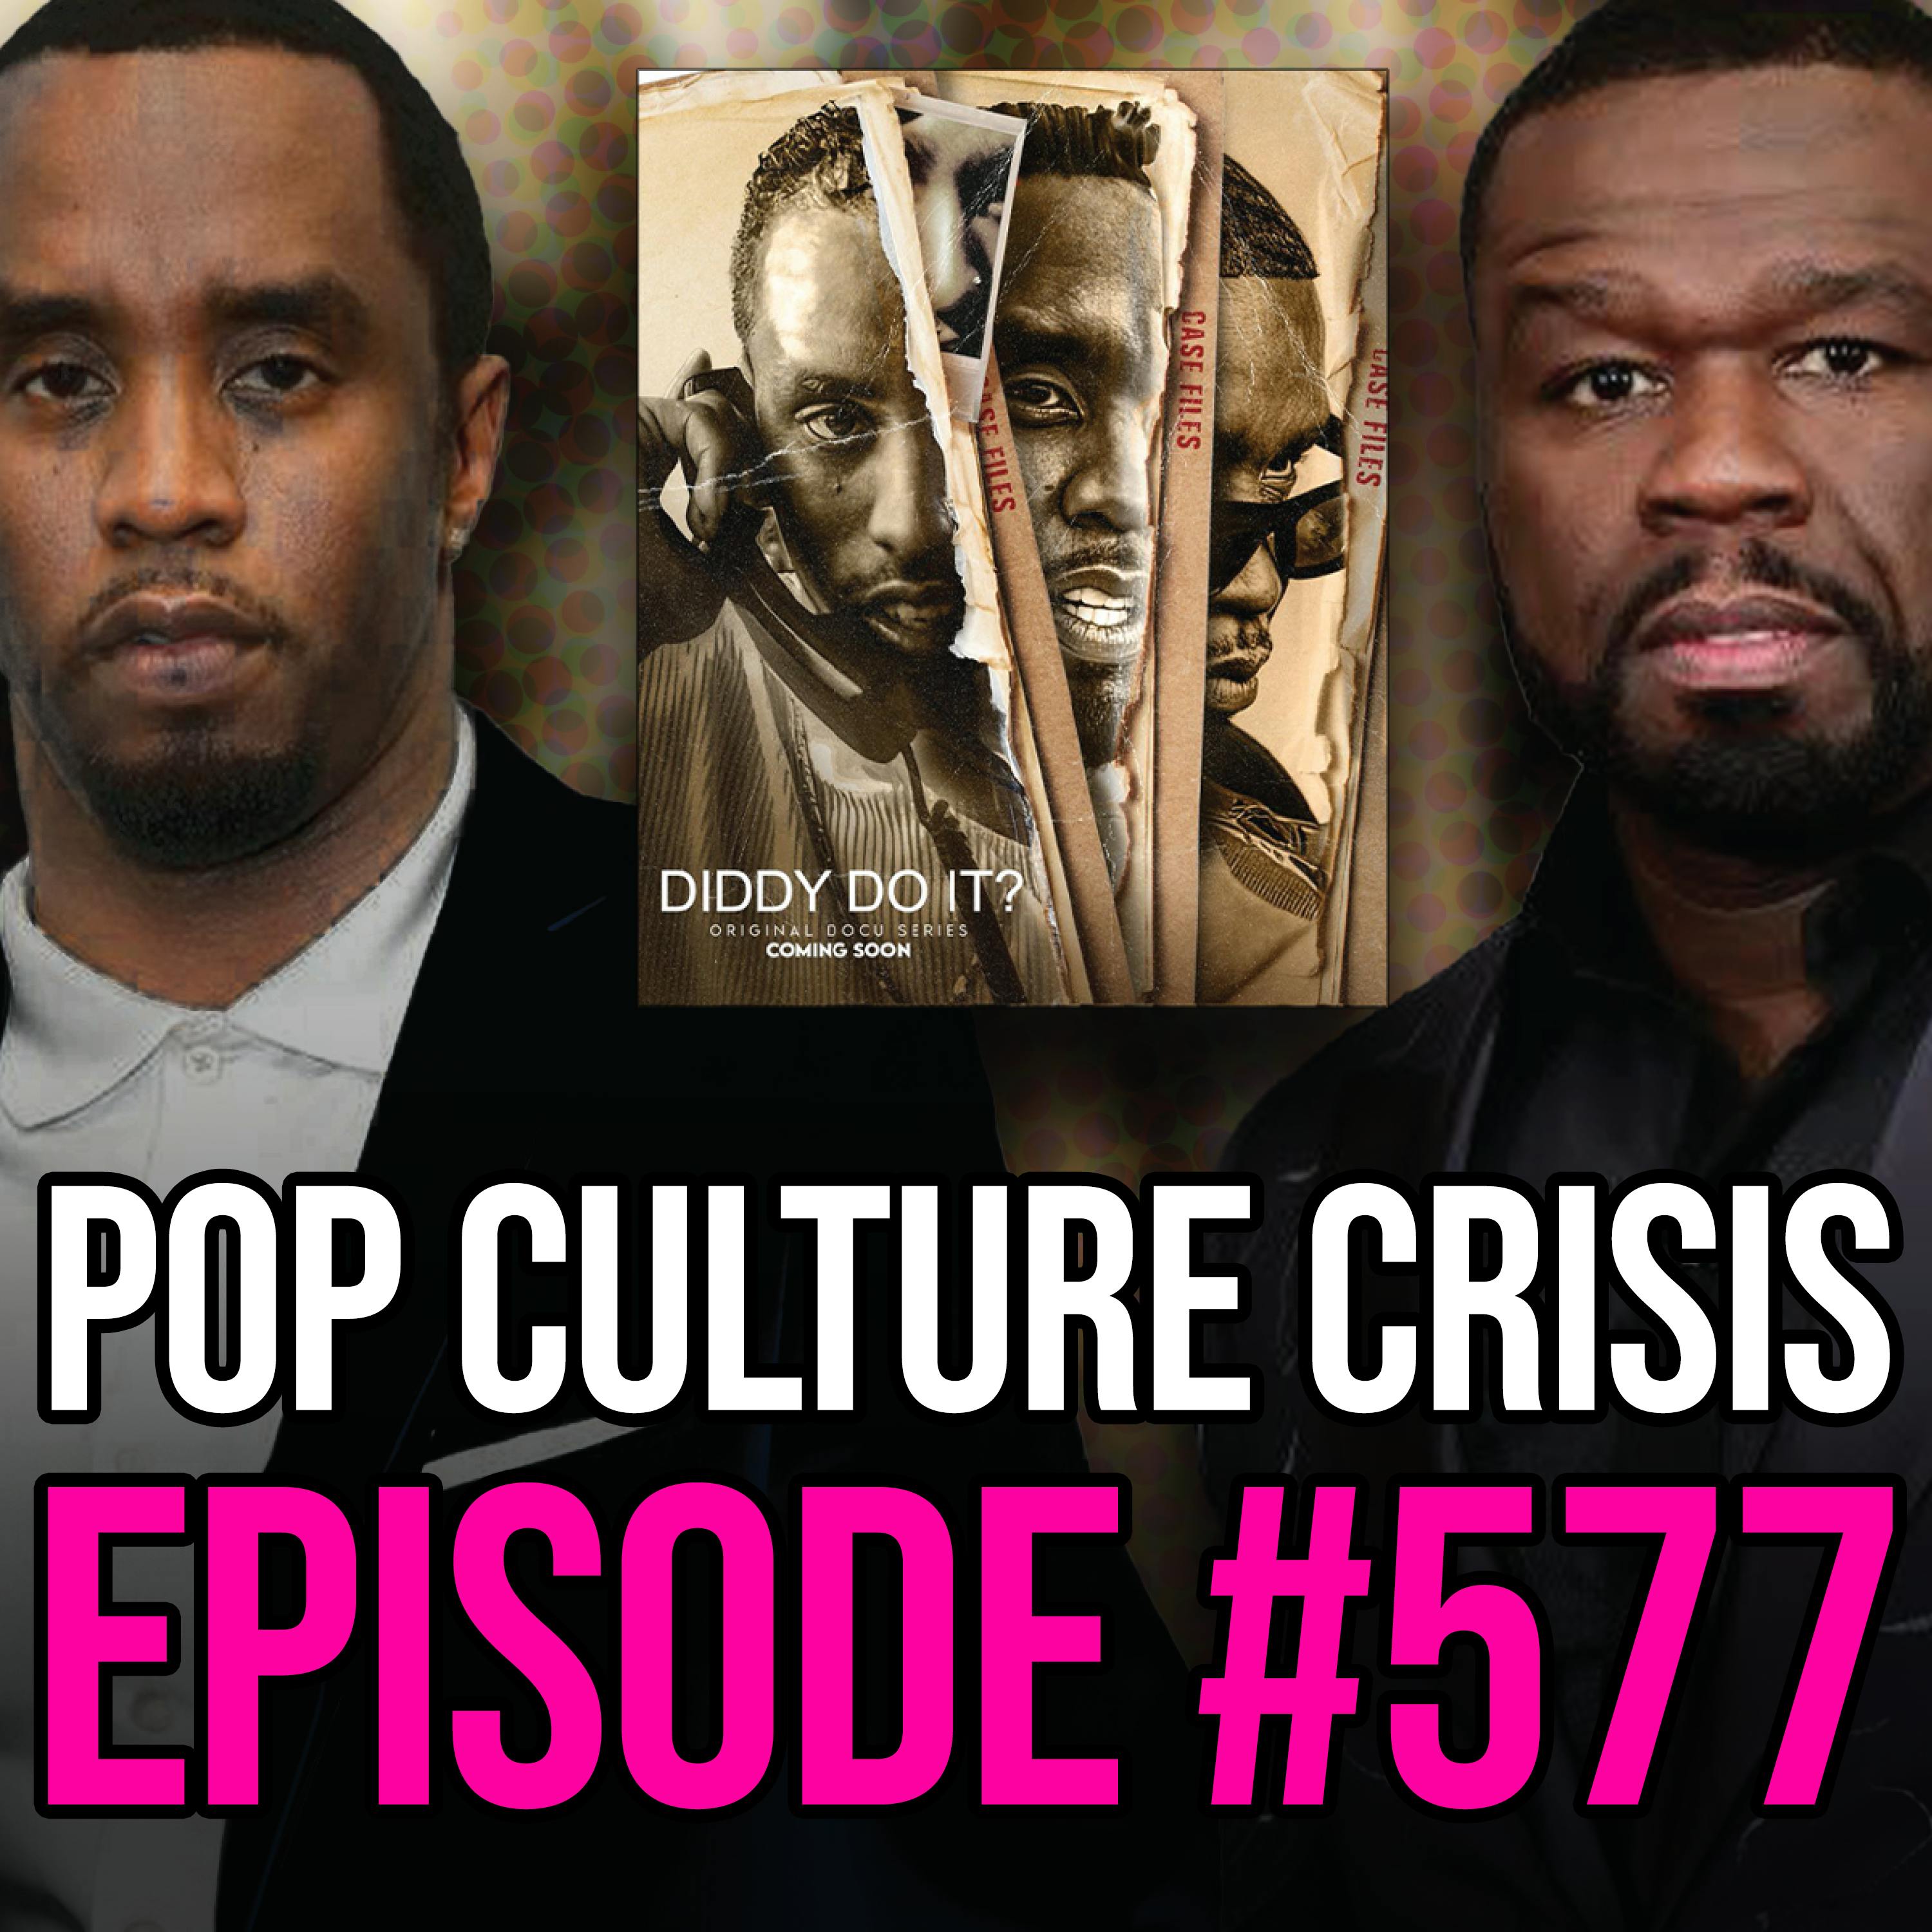 EPISODE 577: 50 Cent EXPOSING Diddy, Drea de Matteo OF Controversy, Feminists ATTACK Eva Mendes